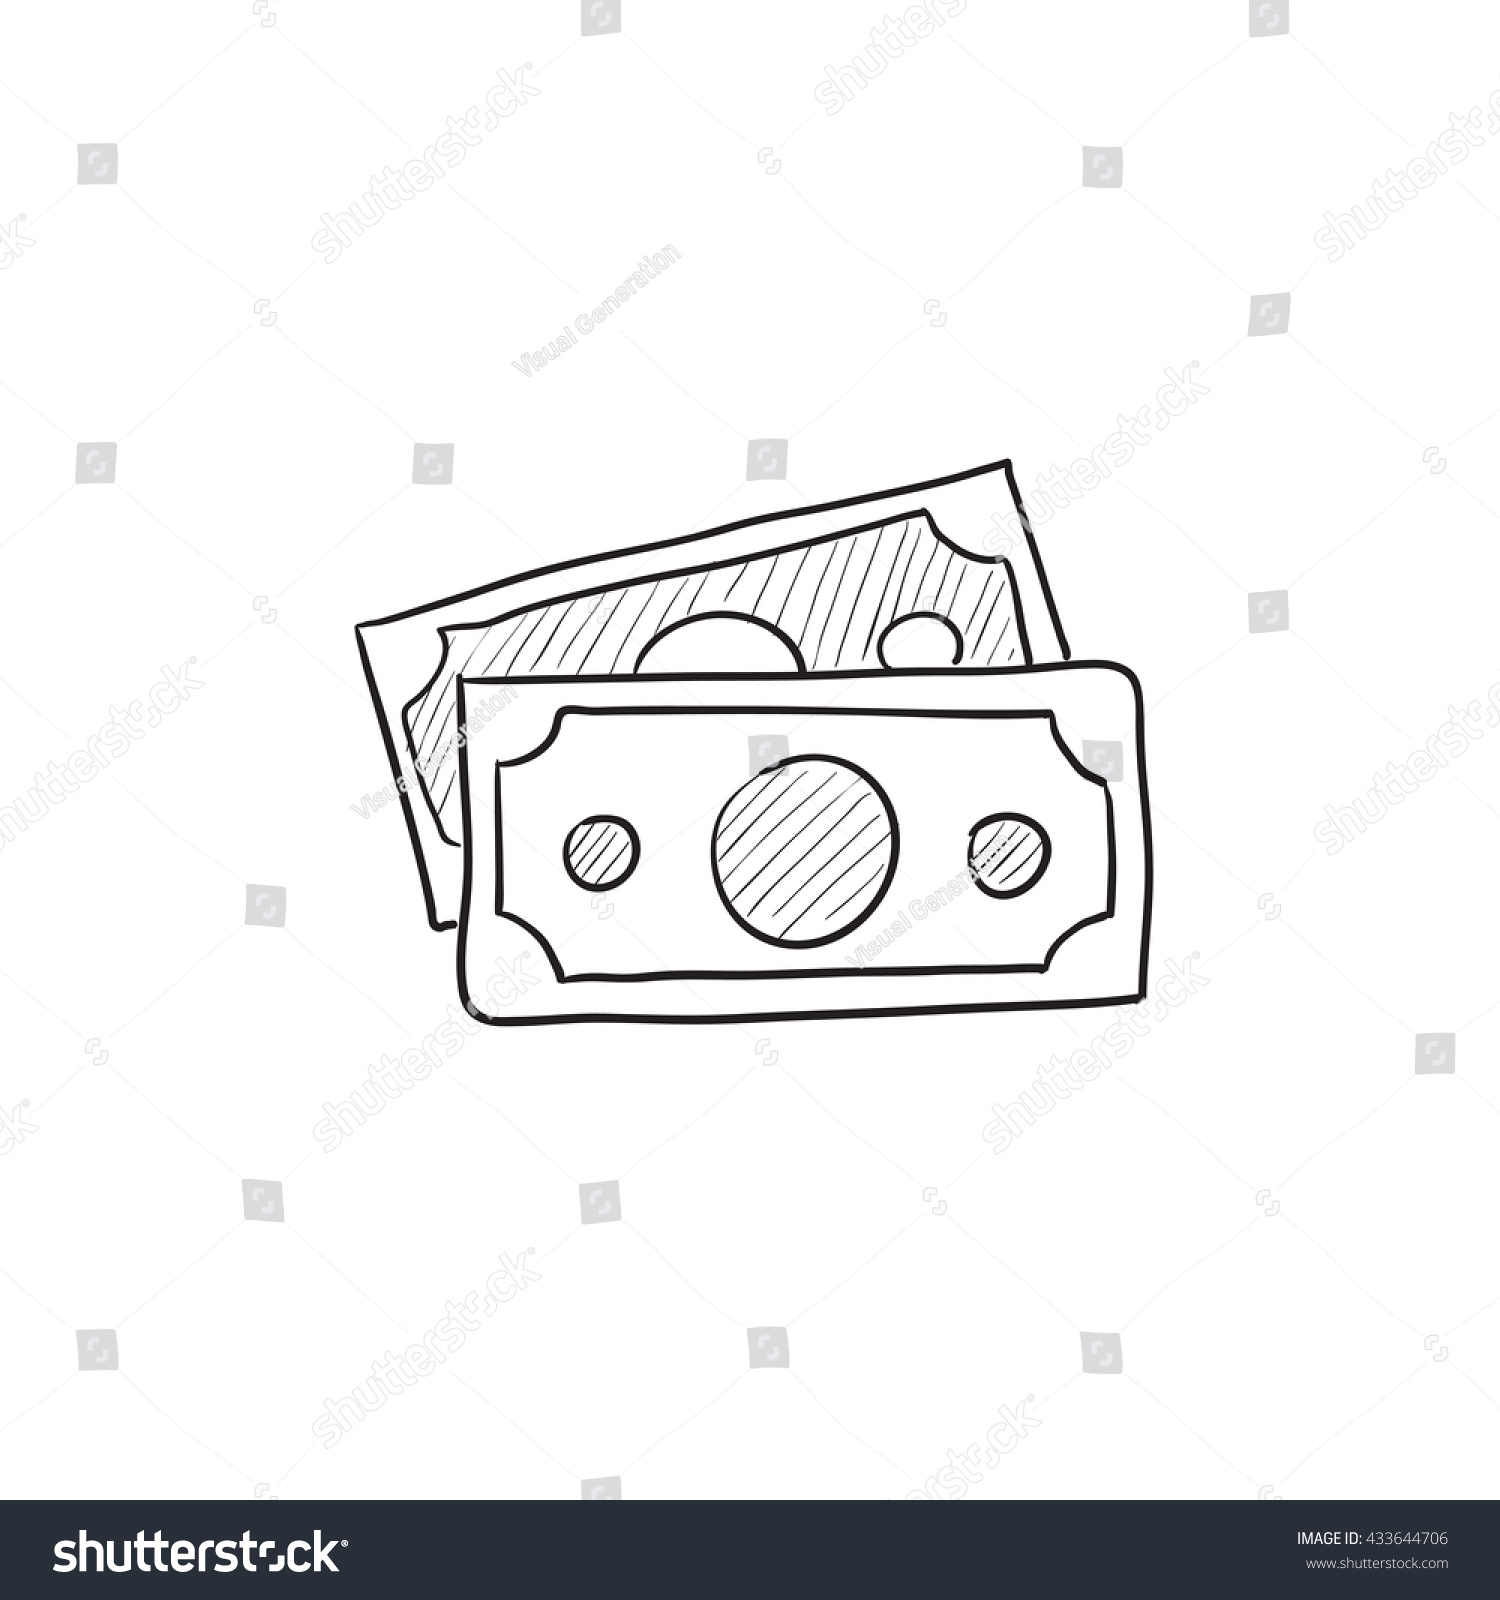 Money Banknotes Vector Sketch Icon Isolated Stock Vector (Royalty Free ...